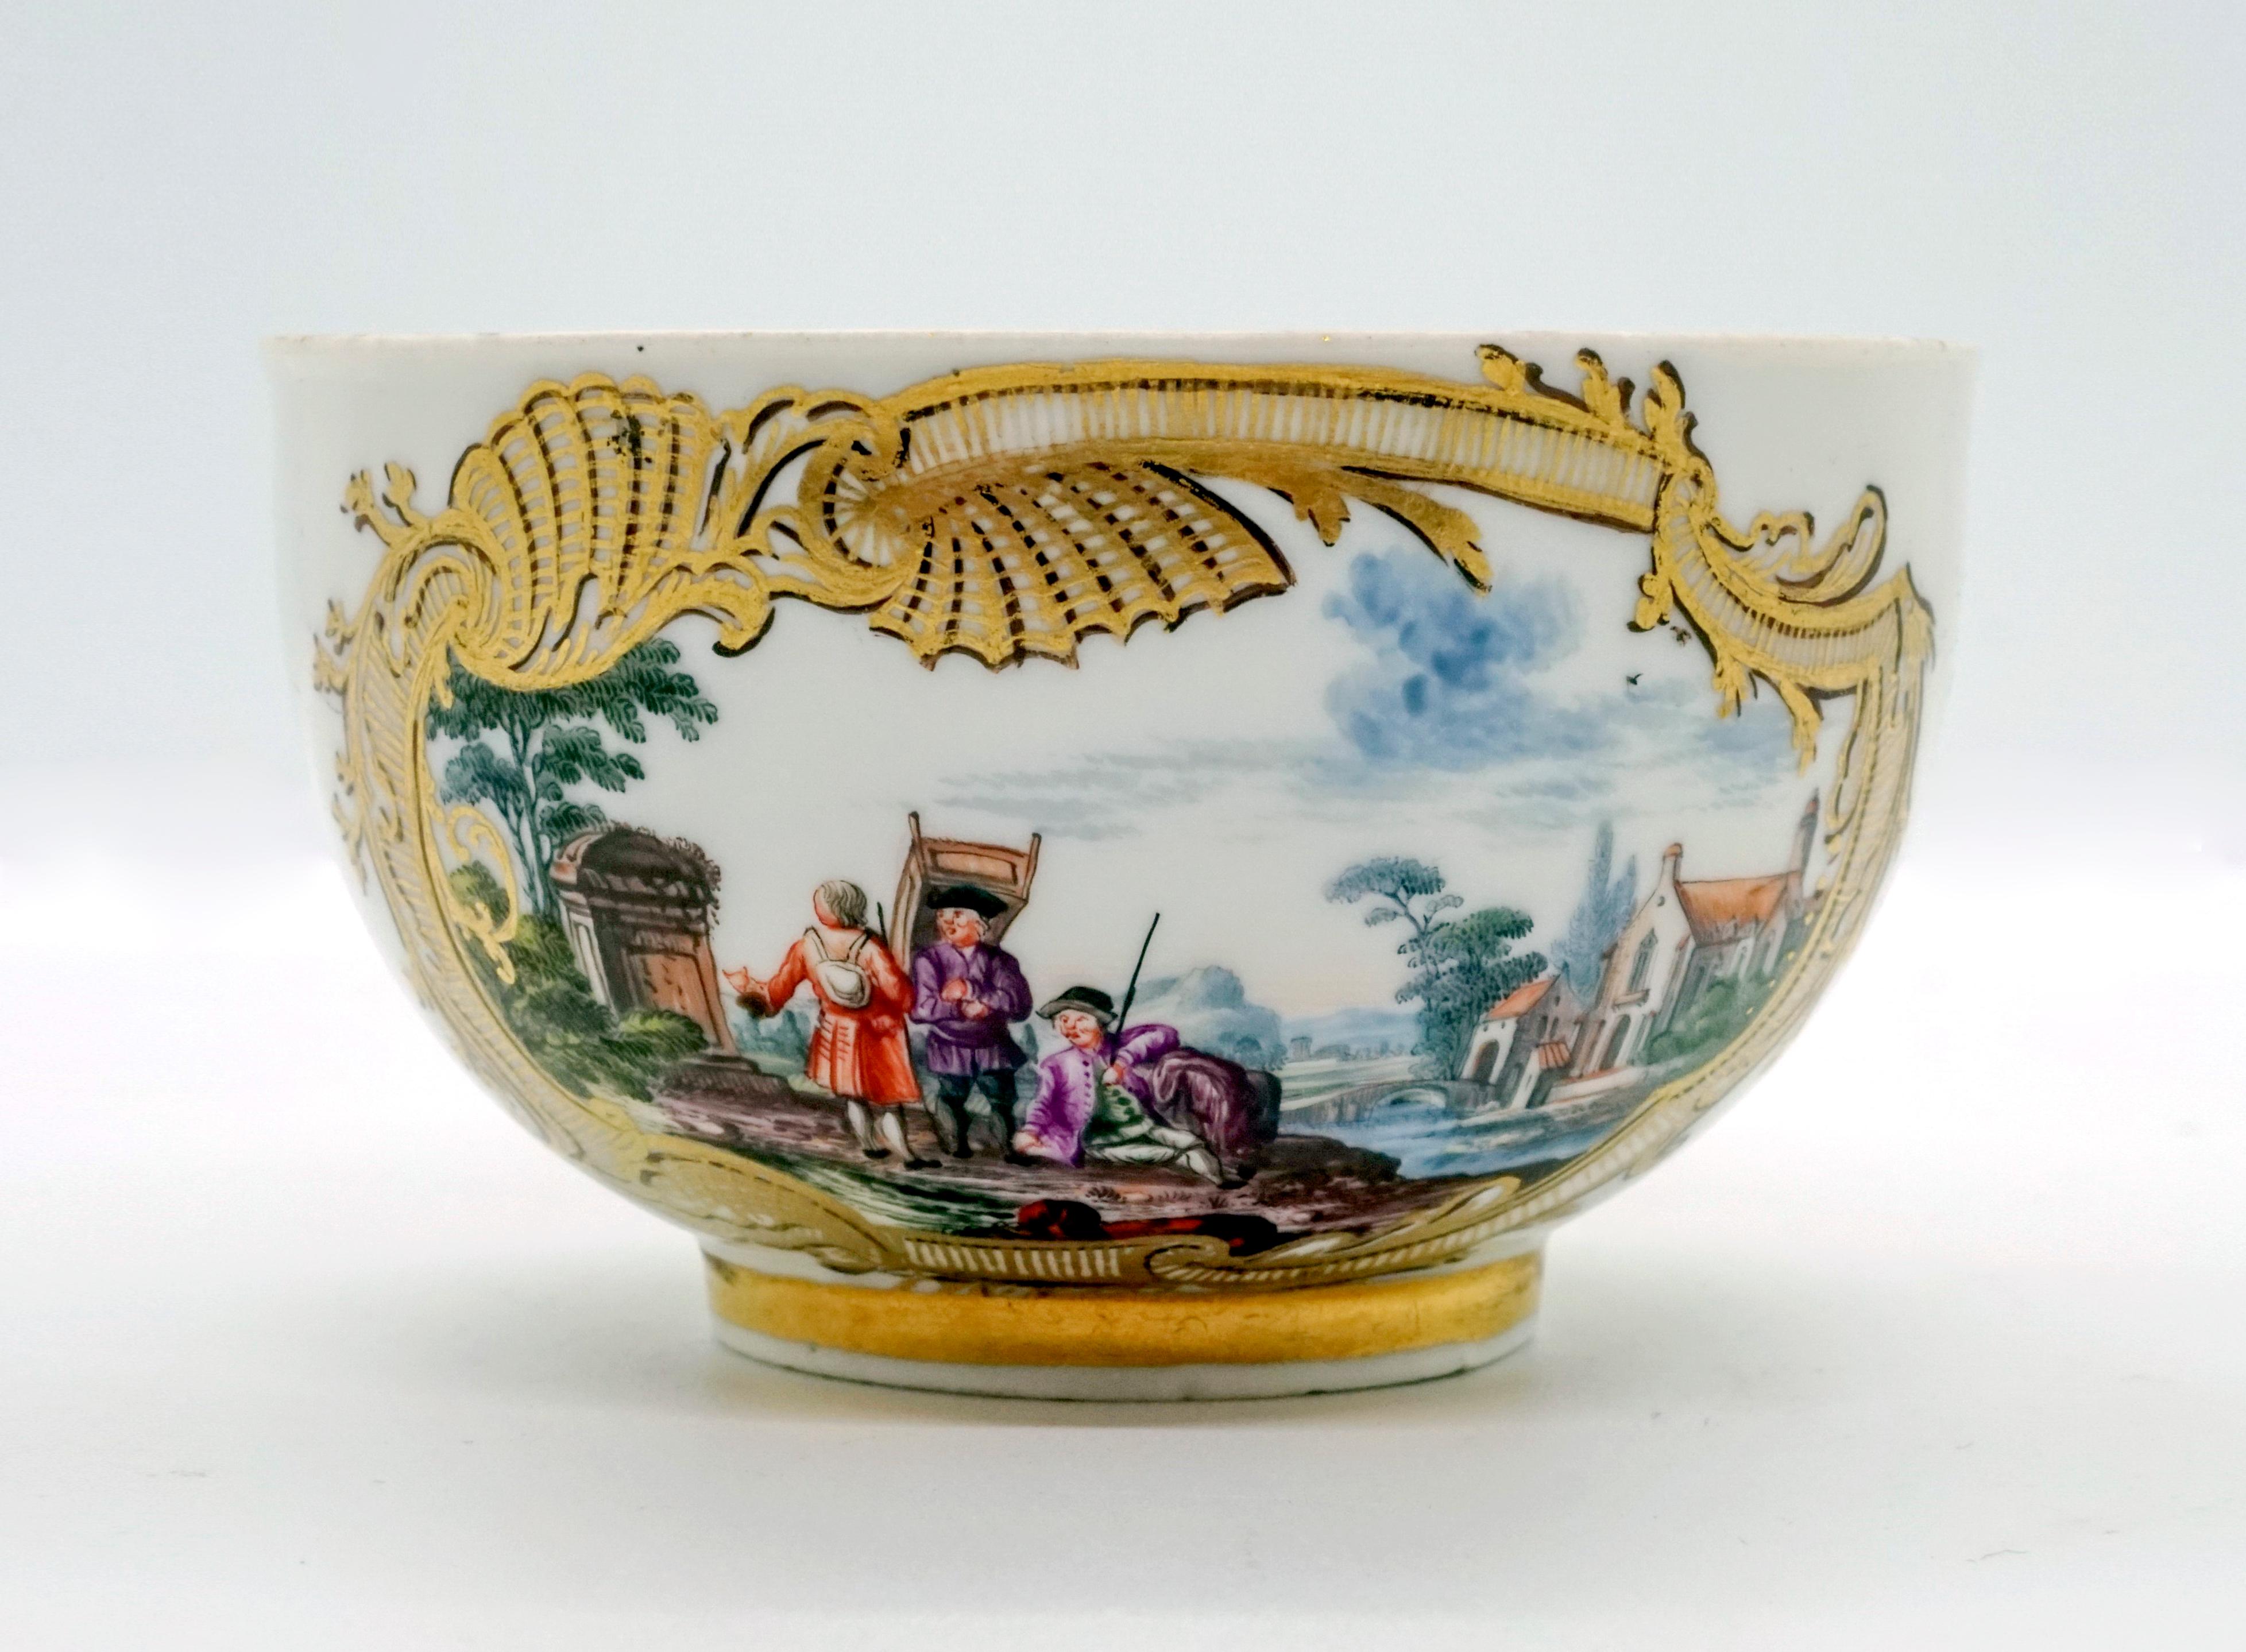 German Eary 19th Century Meissen Cup and Saucer with Kauffahrtei Scenes and Gold Decor